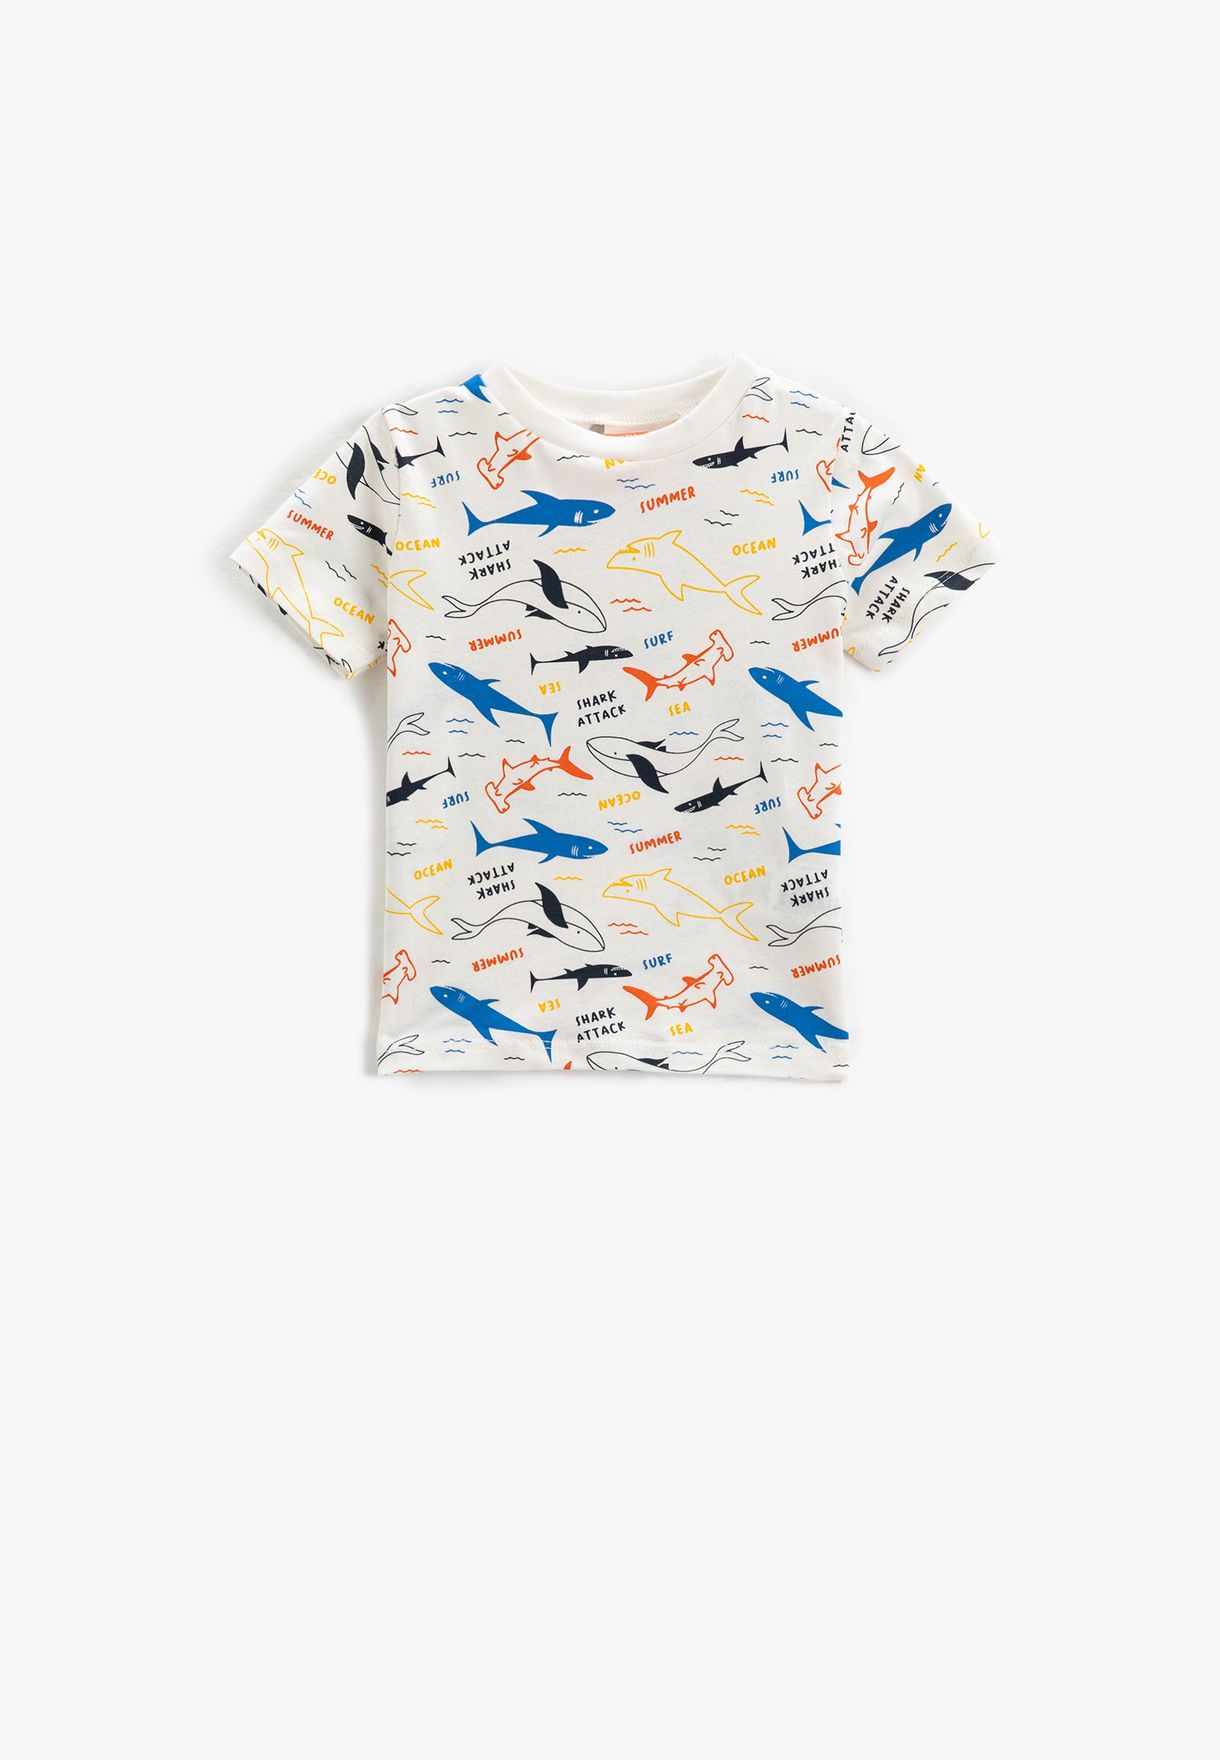 T-Shirt Short Sleeve Crew Neck Shark and Whale Printed